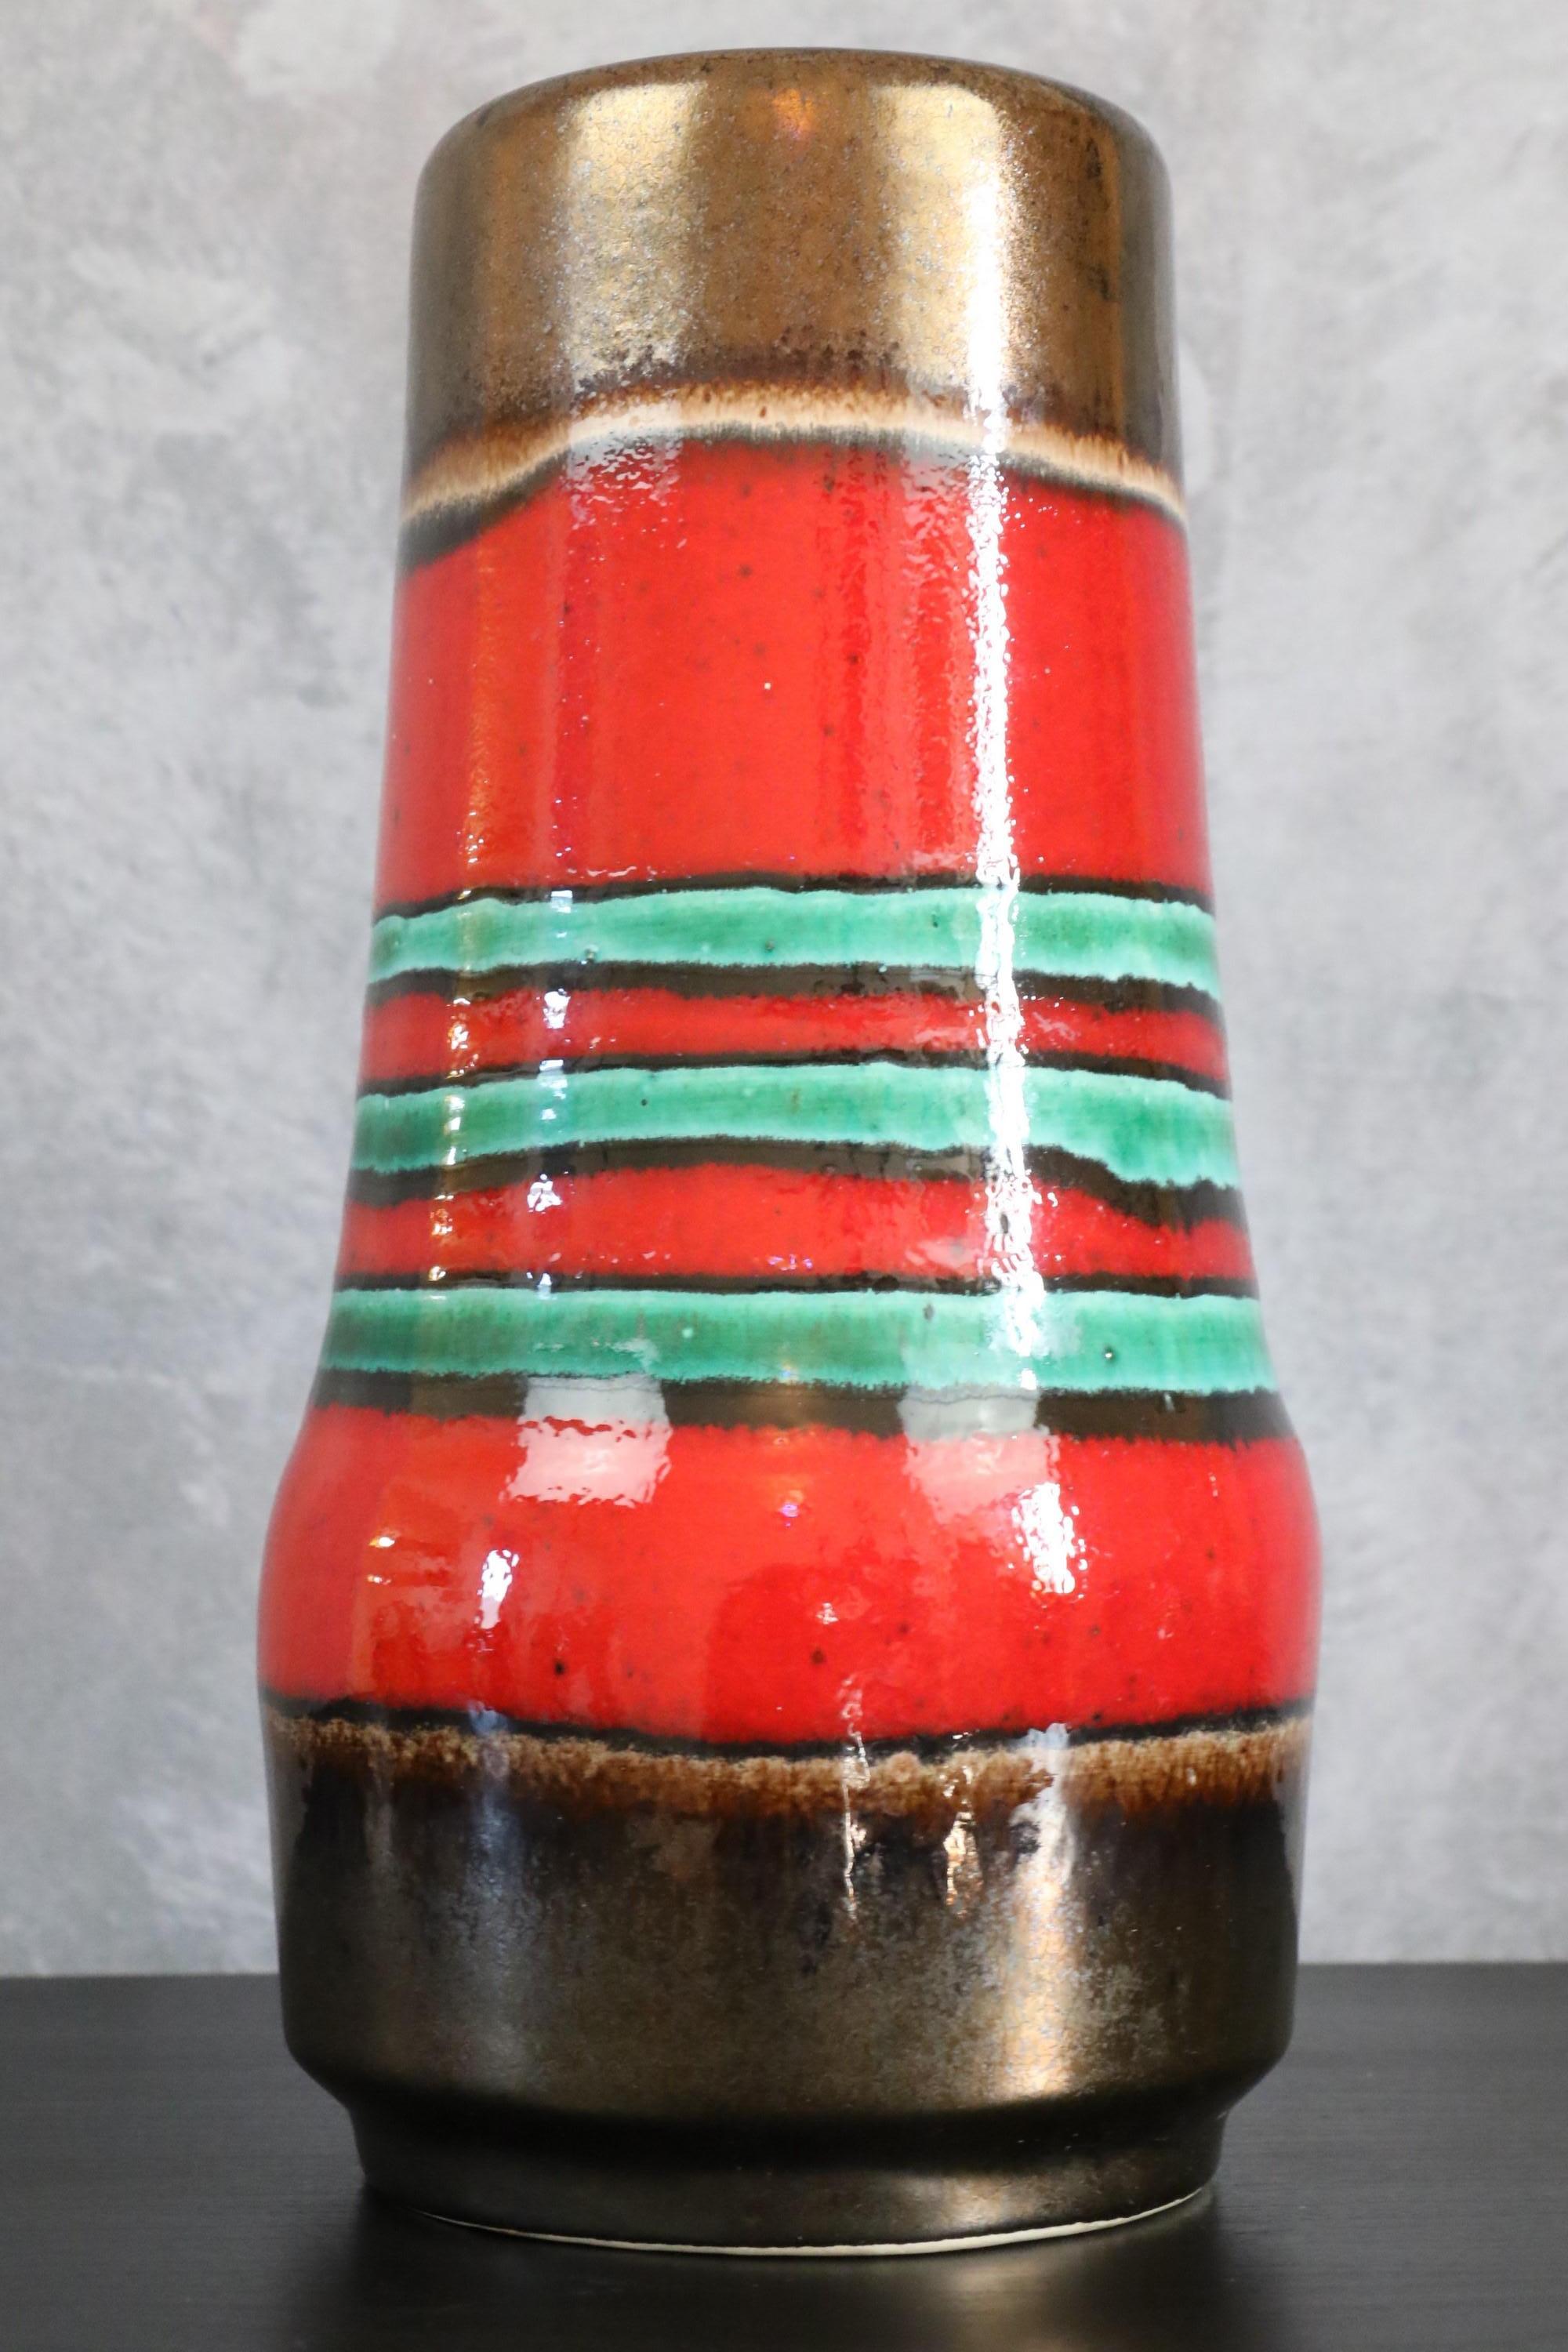 Colorful Mid-Century Modernist from West Germany vase, circa 1970

The enamel is very bright, the red contrasts with the blue stripes giving a lot of character to this piece. The neckline of the vase is worked with a slightly golden and shiny